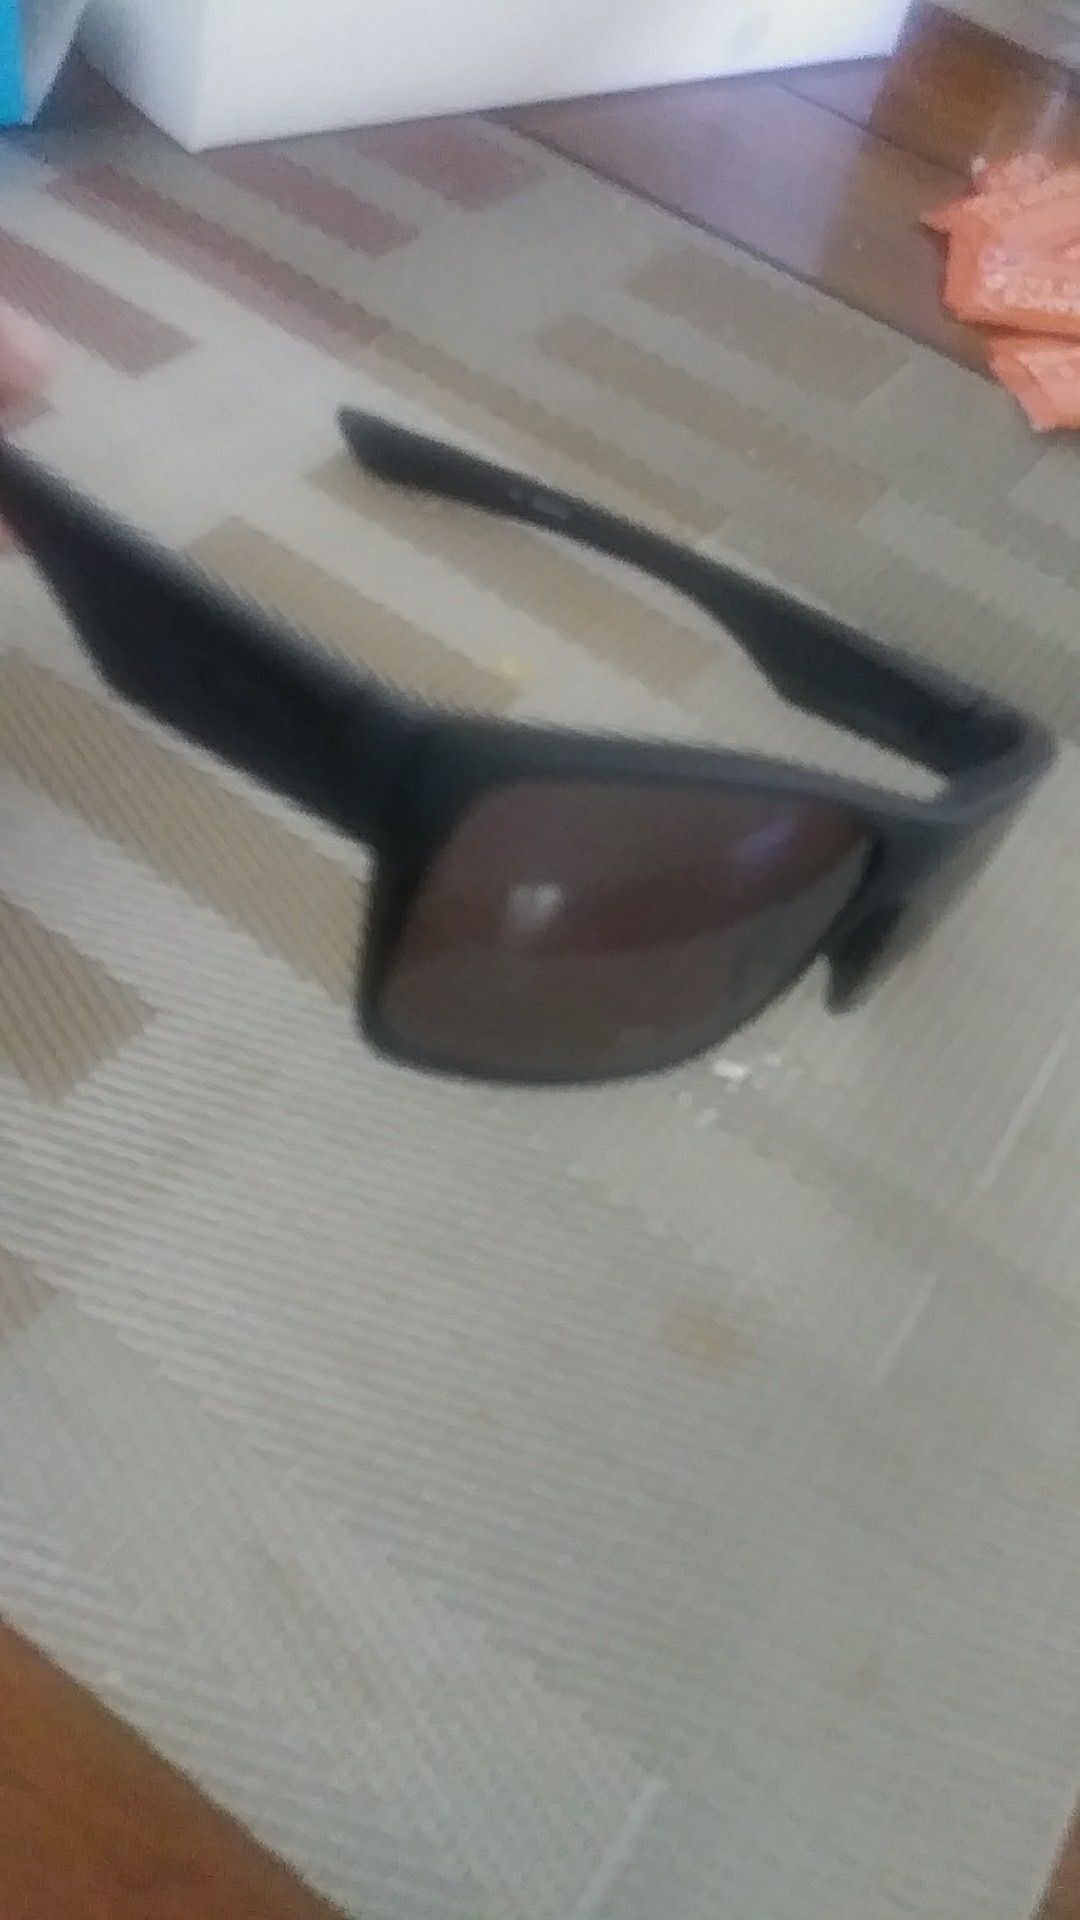 Oakley TWOFACE Sunglases Used